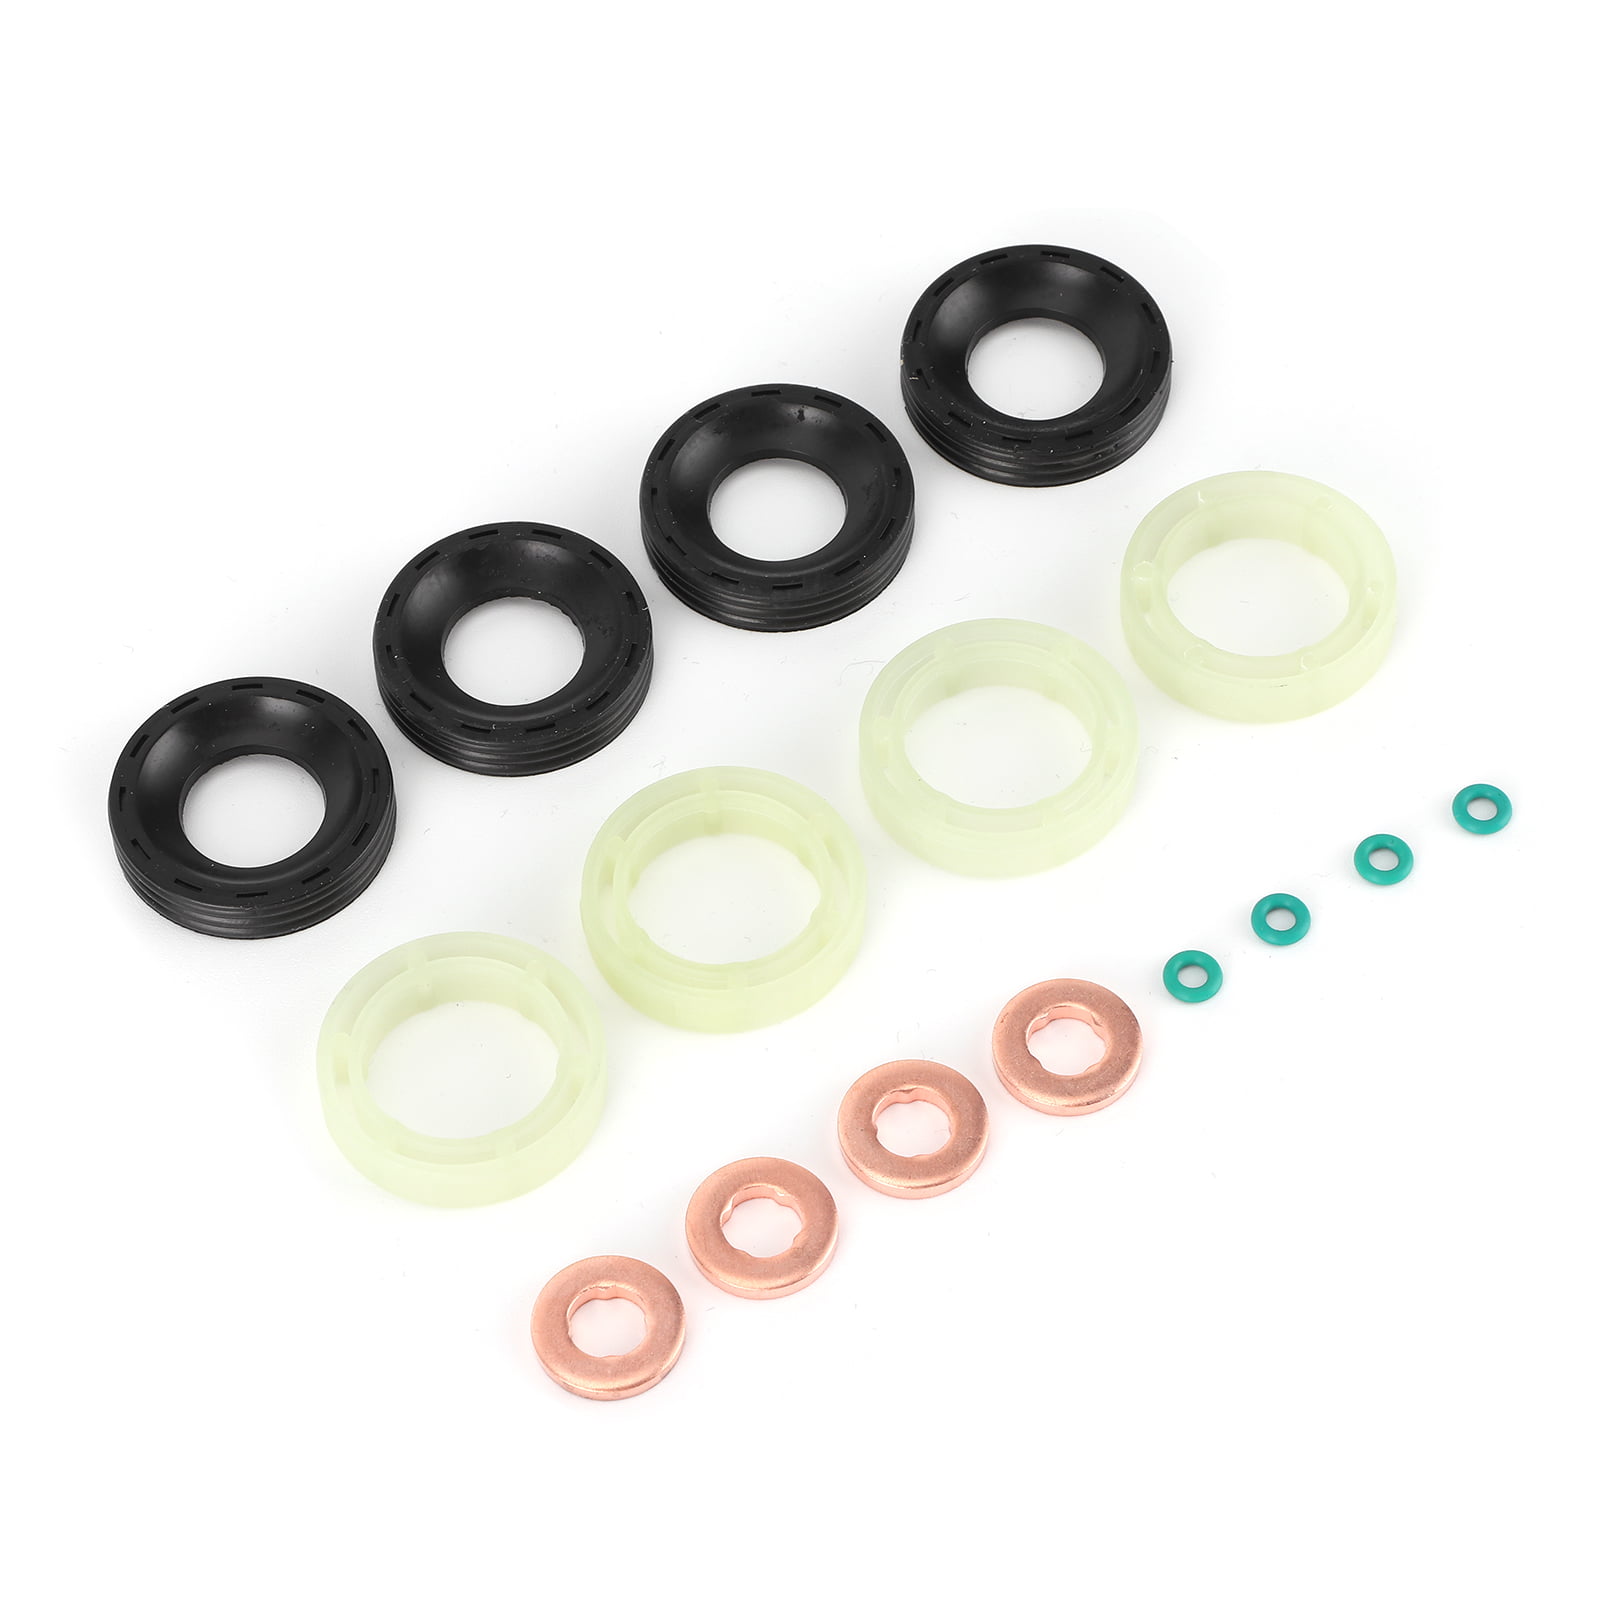 ORING SET FITS 1.6 TDCi/HDi FUEL INJECTOR SEAL WASHER 